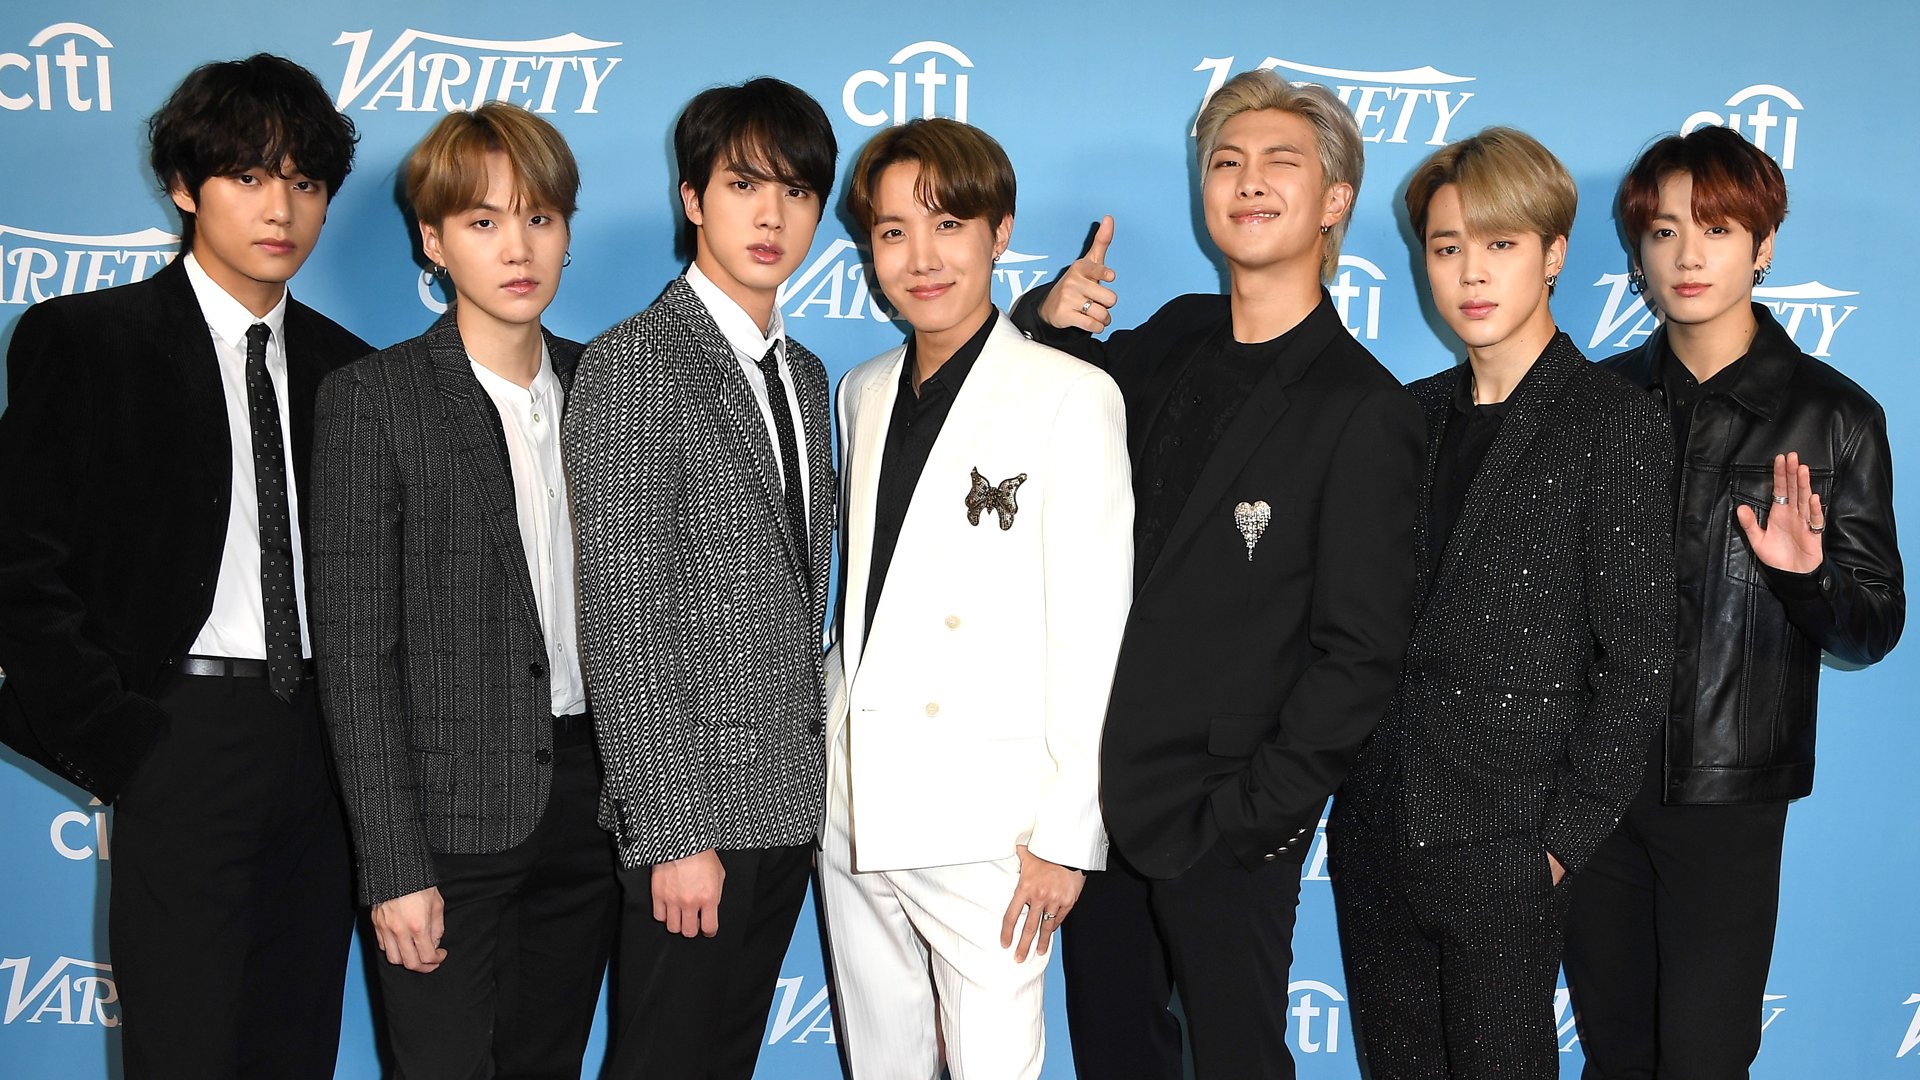 V, SUGA, Jin, J-Hope, RM, Jimin, and Jungkook of BTS at the 2019 Variety's Hitmakers Brunch at Soho House on December 07, 2019 in West Hollywood, California.